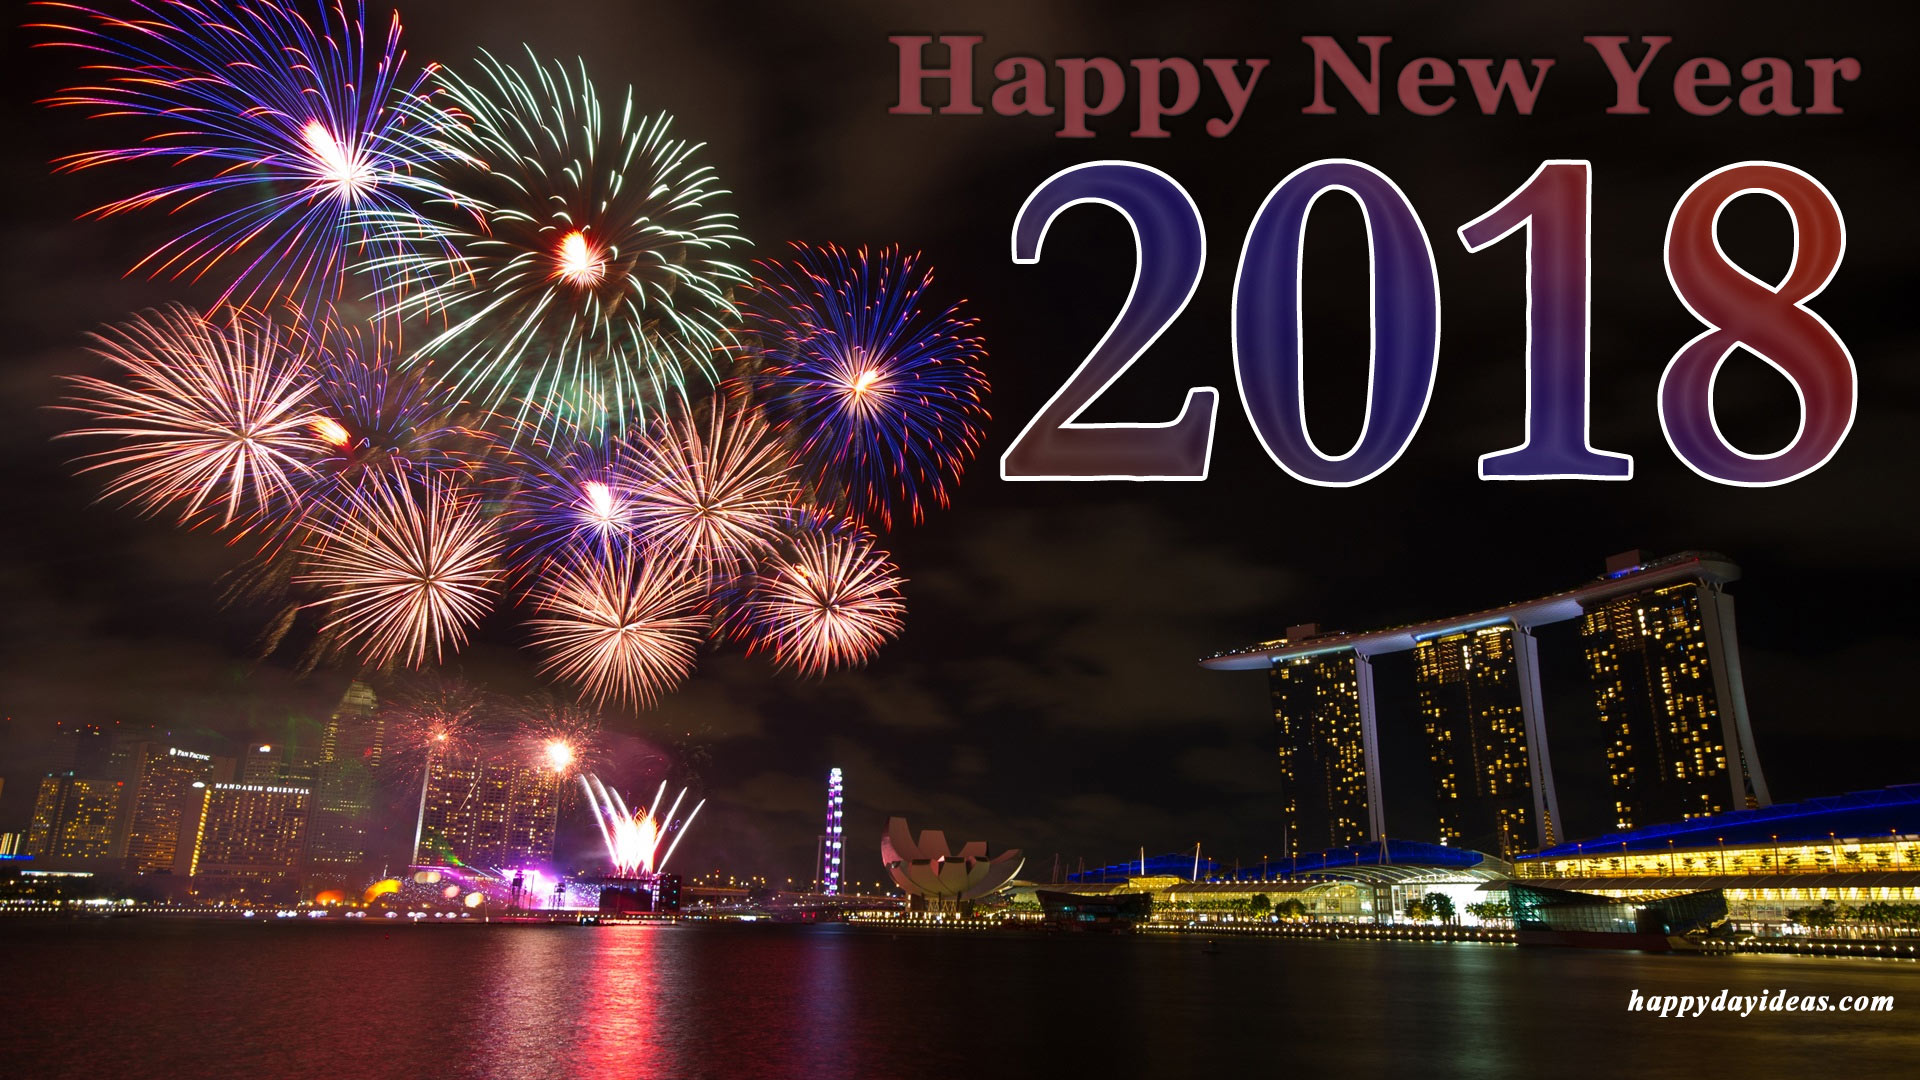 Happy New Year 2018 wallpaper download in HD 1920x1080